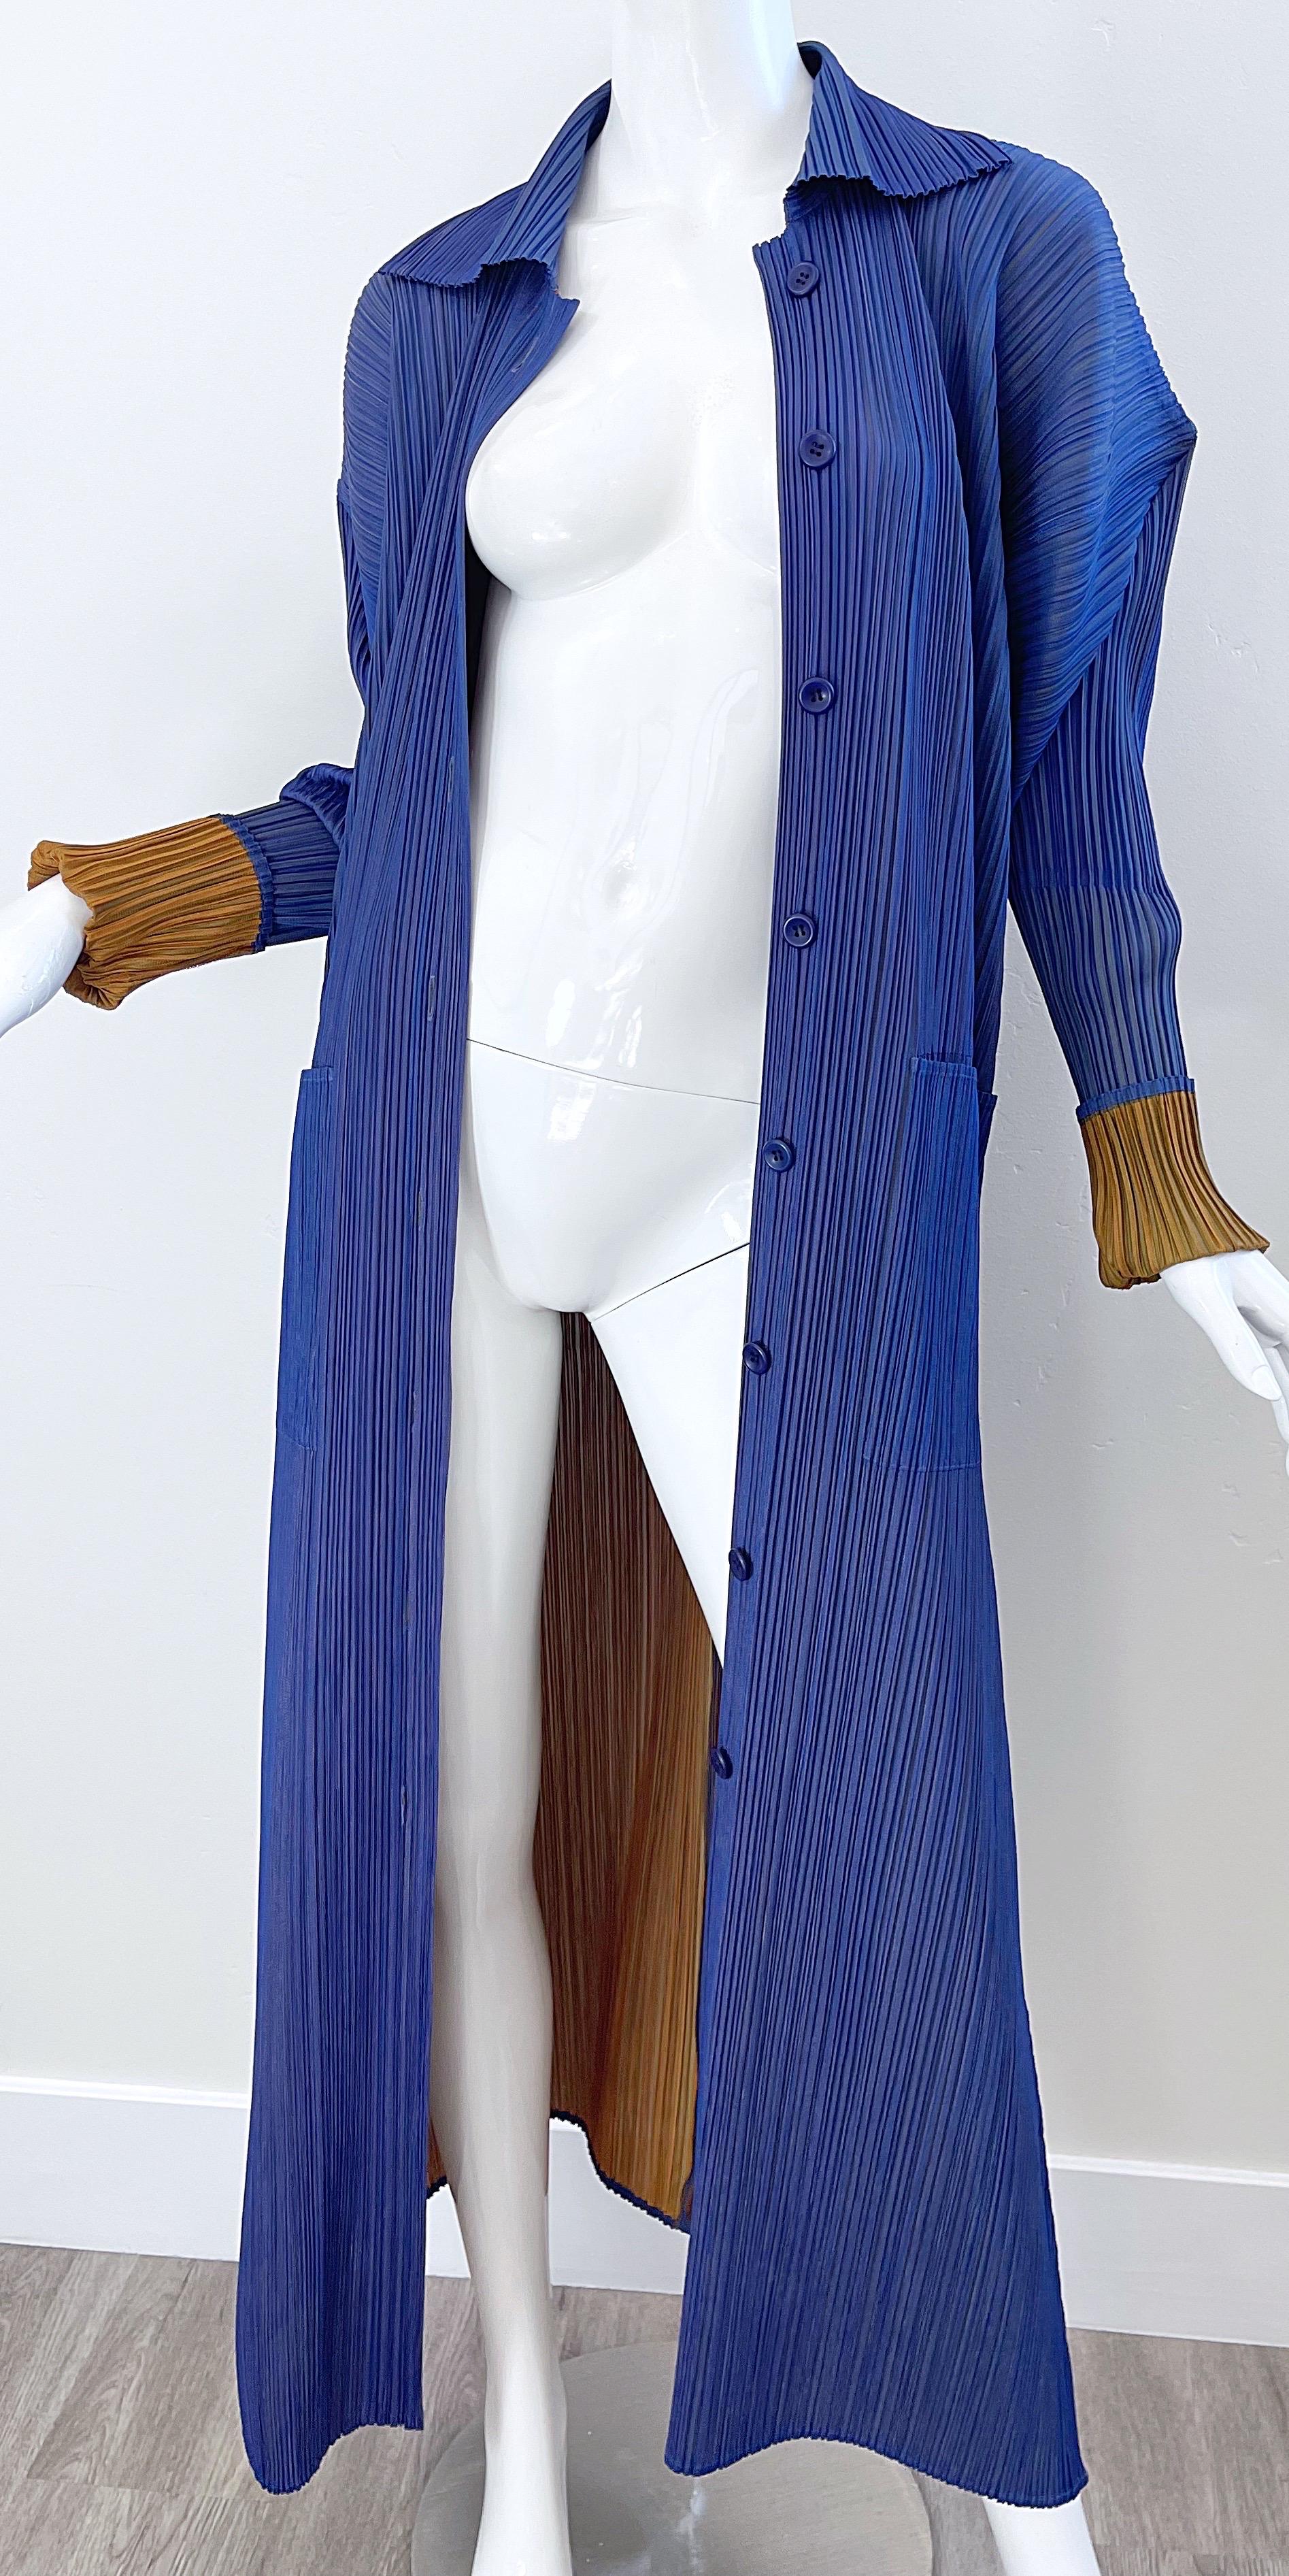 1990s Issey Miyake Pleats Please Blue + Marigold Avant Garde Duster Jacket Sz 3 In Excellent Condition For Sale In San Diego, CA